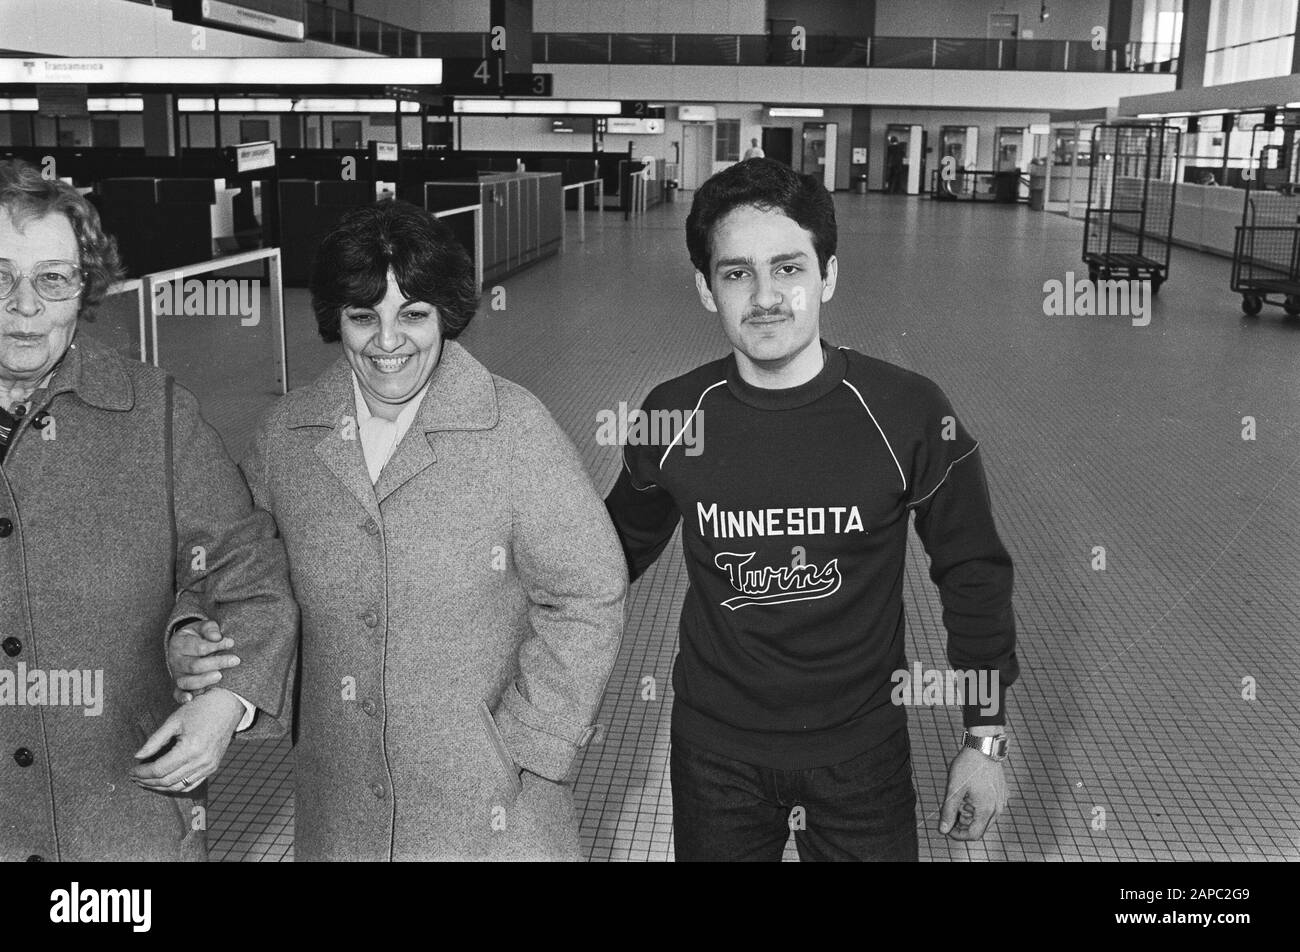 17-year-old Student of Montessor-lyceum the Iranian Said Abbassi still out of the country despite actions of fellow students Date: 29 March 1982 Location: Noord-Holland, Schiphol Keywords: DEVELOPT, pupils Personal Name: Abbassi, Said Stock Photo